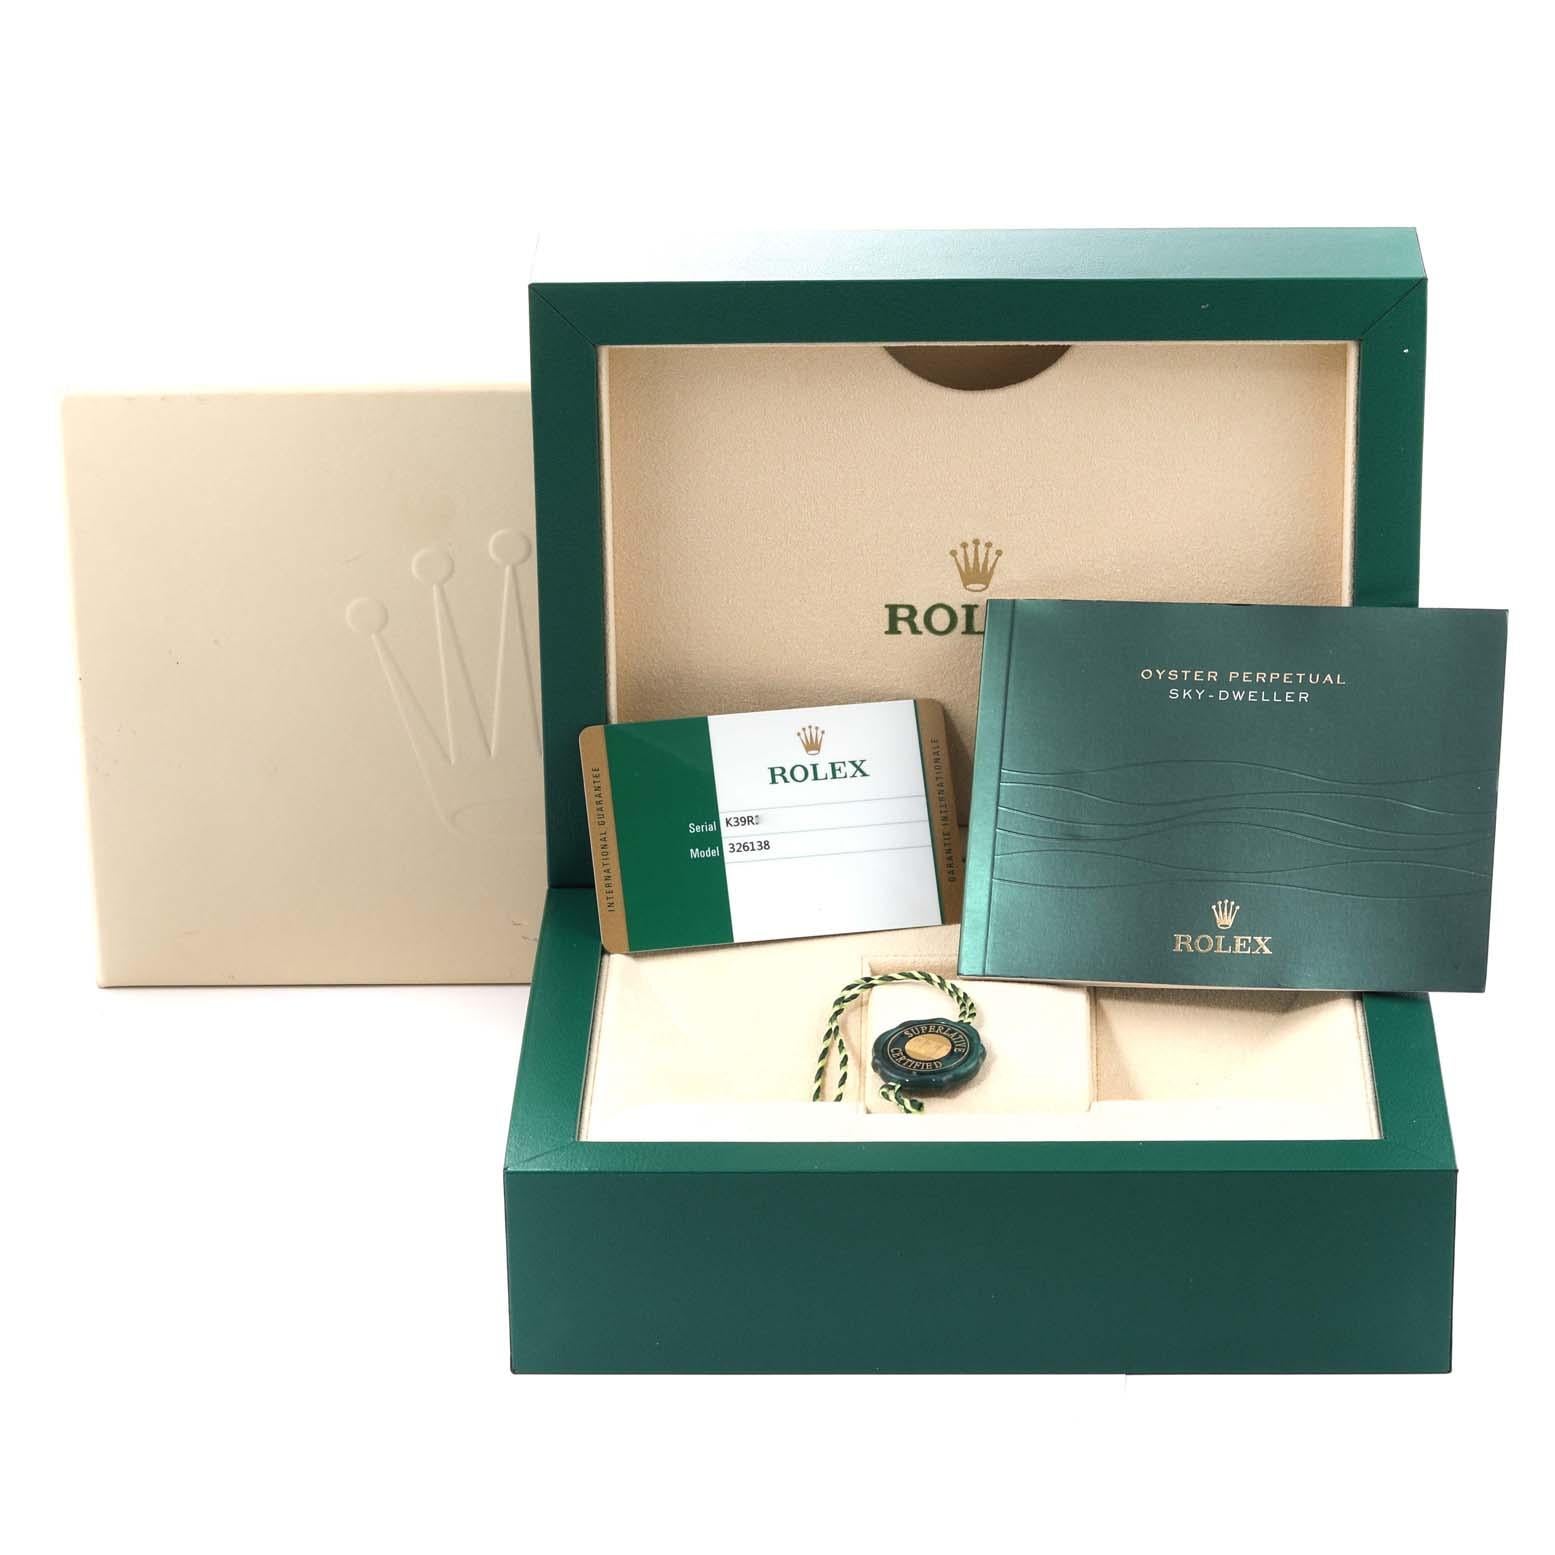 Rolex Sky Dweller Yellow Gold Silver Dial Mens Watch 326138 Box Card For Sale 2